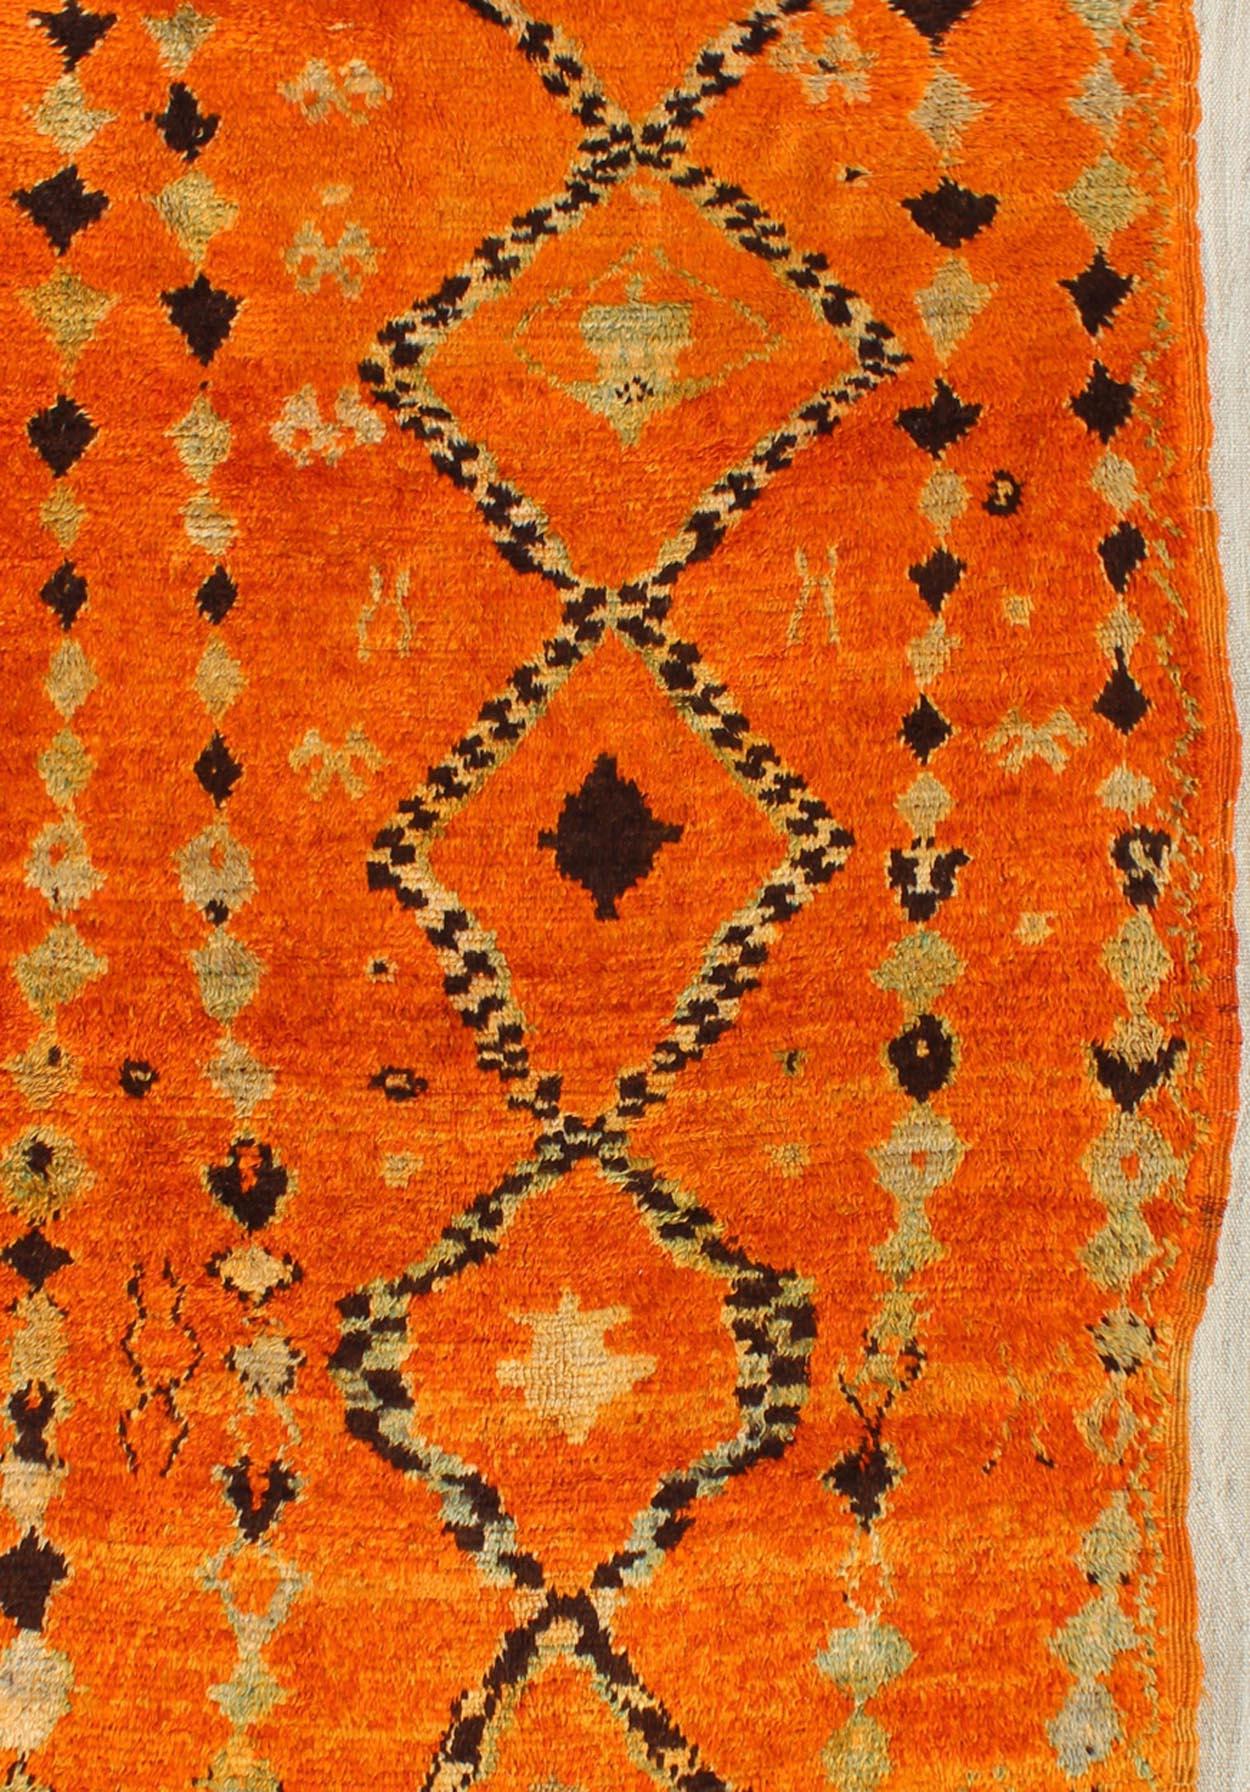 Tribal design vintage Moroccan rug in red, orange, charcoal, ivory, rug BDS-2100, Keivan Woven Arts / country of origin / type: Morocco / Tribal, circa 1940.

Vintage Moroccan Beni Mkild carpets are rarities from various regions of Morocco. From